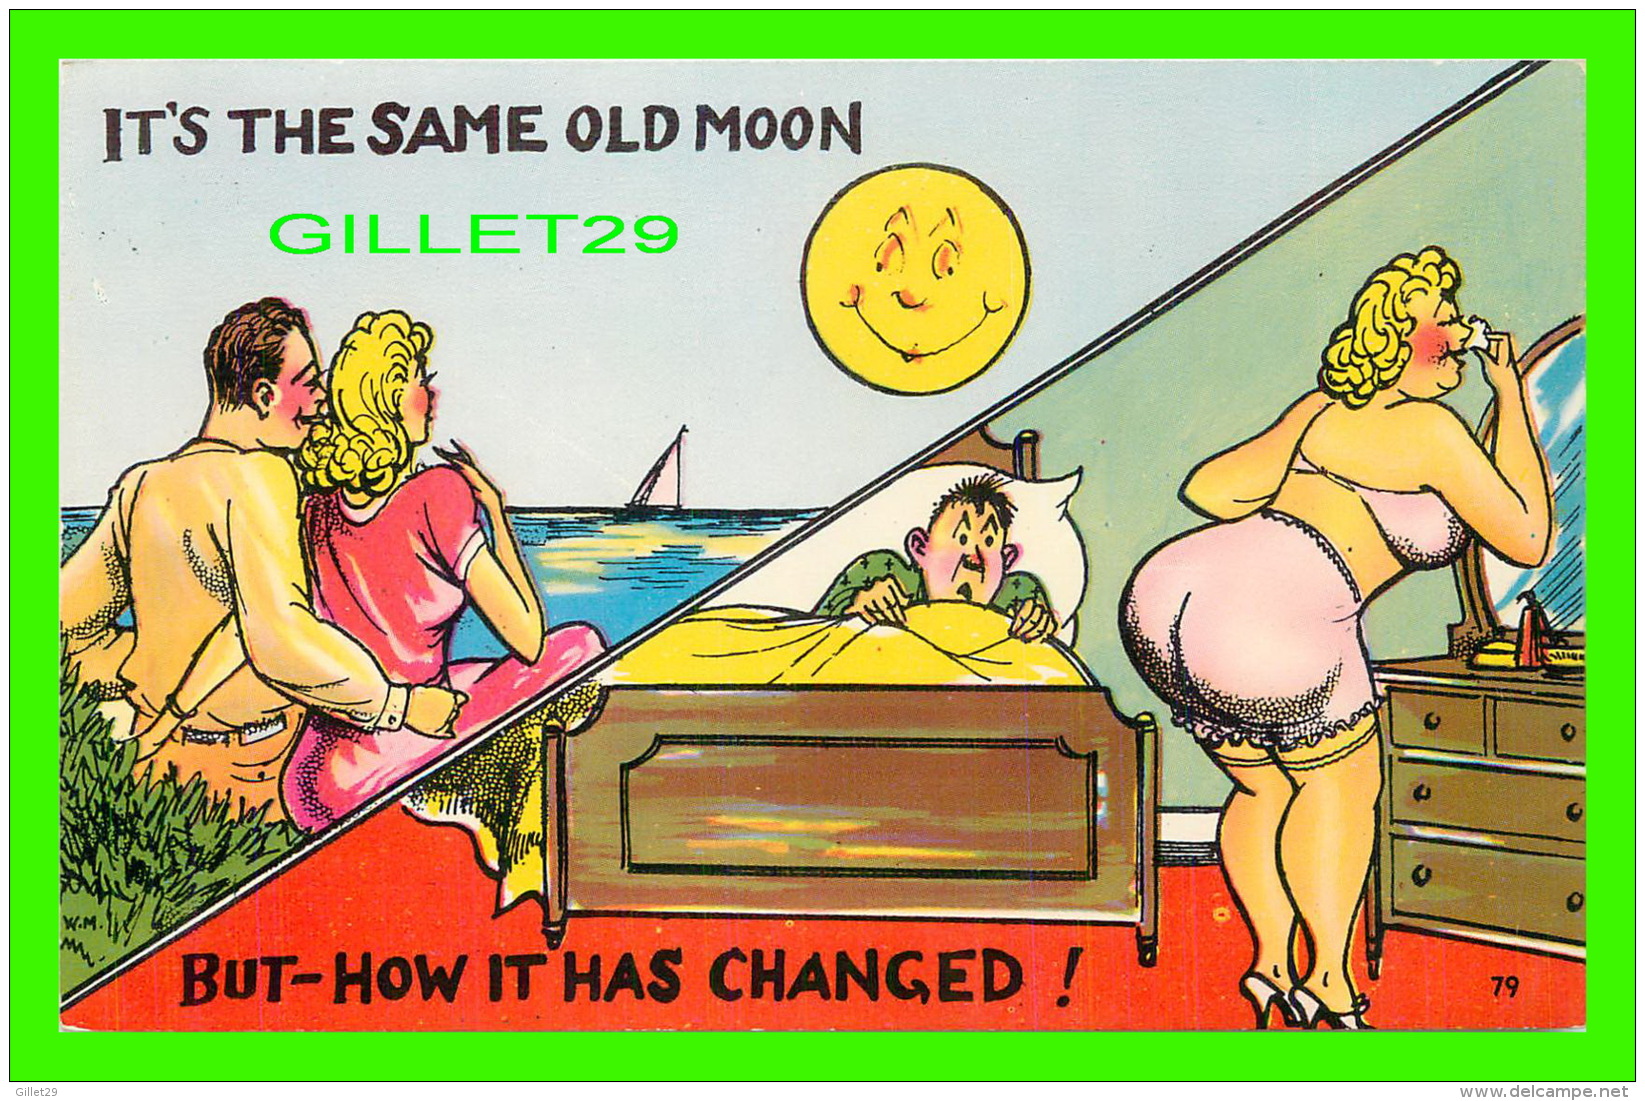 HUMOUR, COMICS - IT'S THE SAME OLS MOON BUT-HOW IT HAS CHANGED - A SHINI COLOR - - Humor